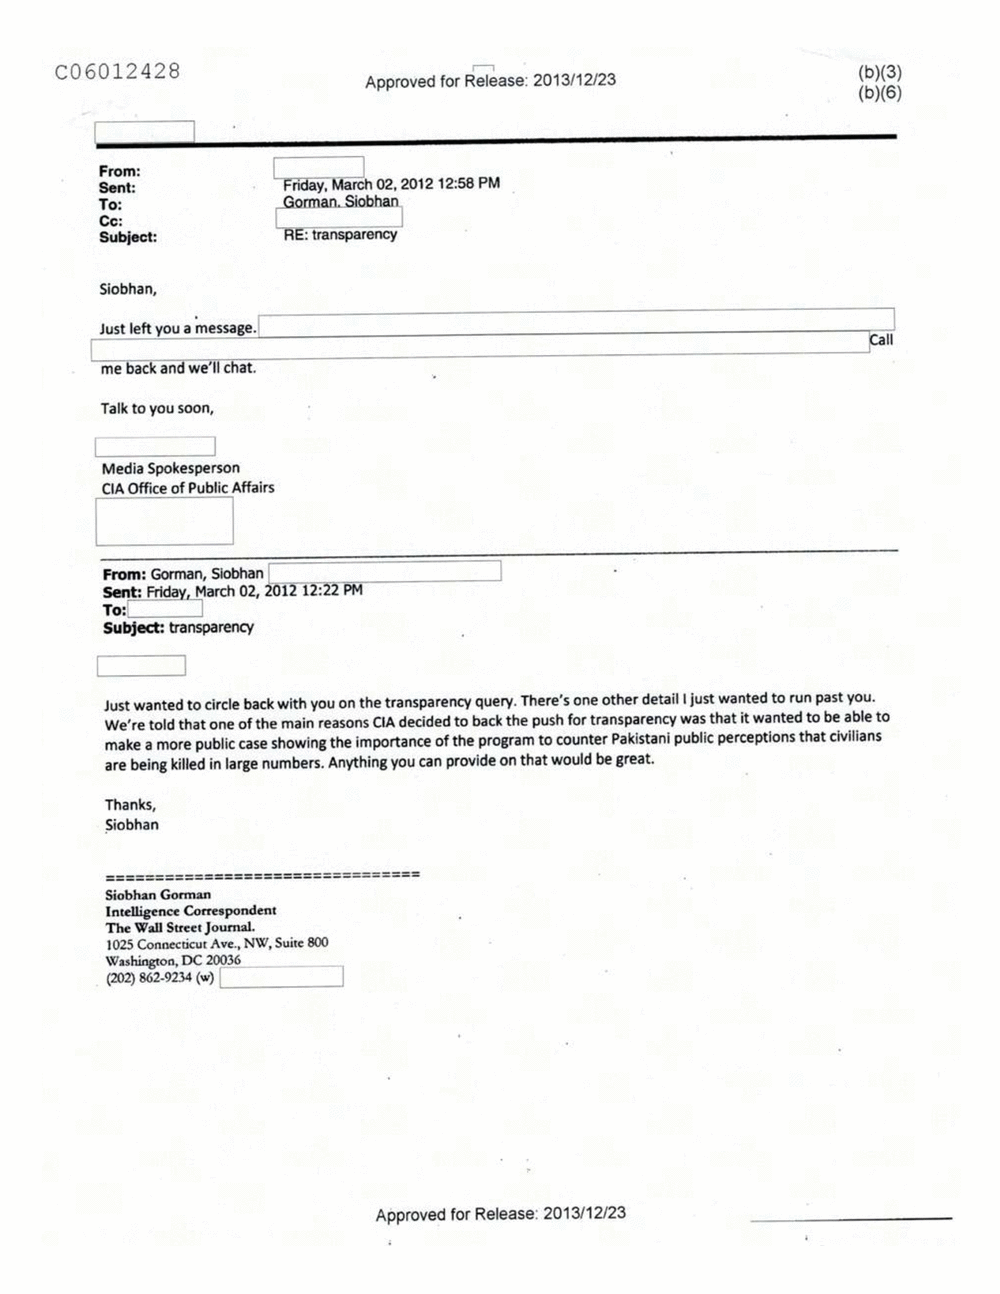 Page 3 from Email Correspondence Between Reporters and CIA Flacks